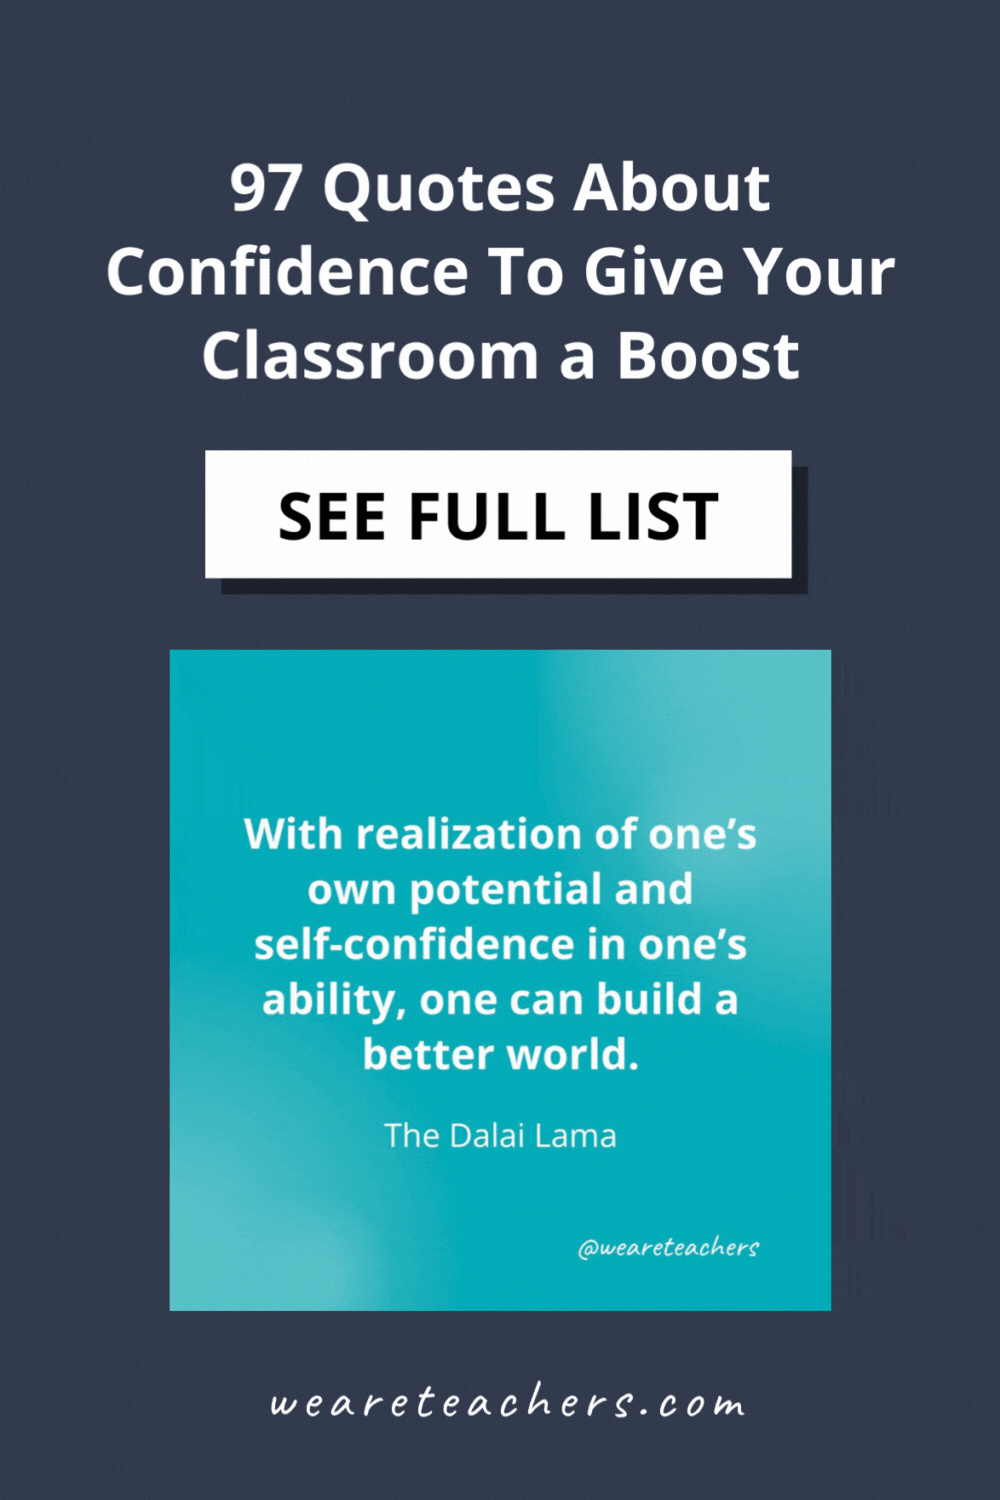 These quotes about confidence will light up your classroom and give everyone a boost when it's needed the most!